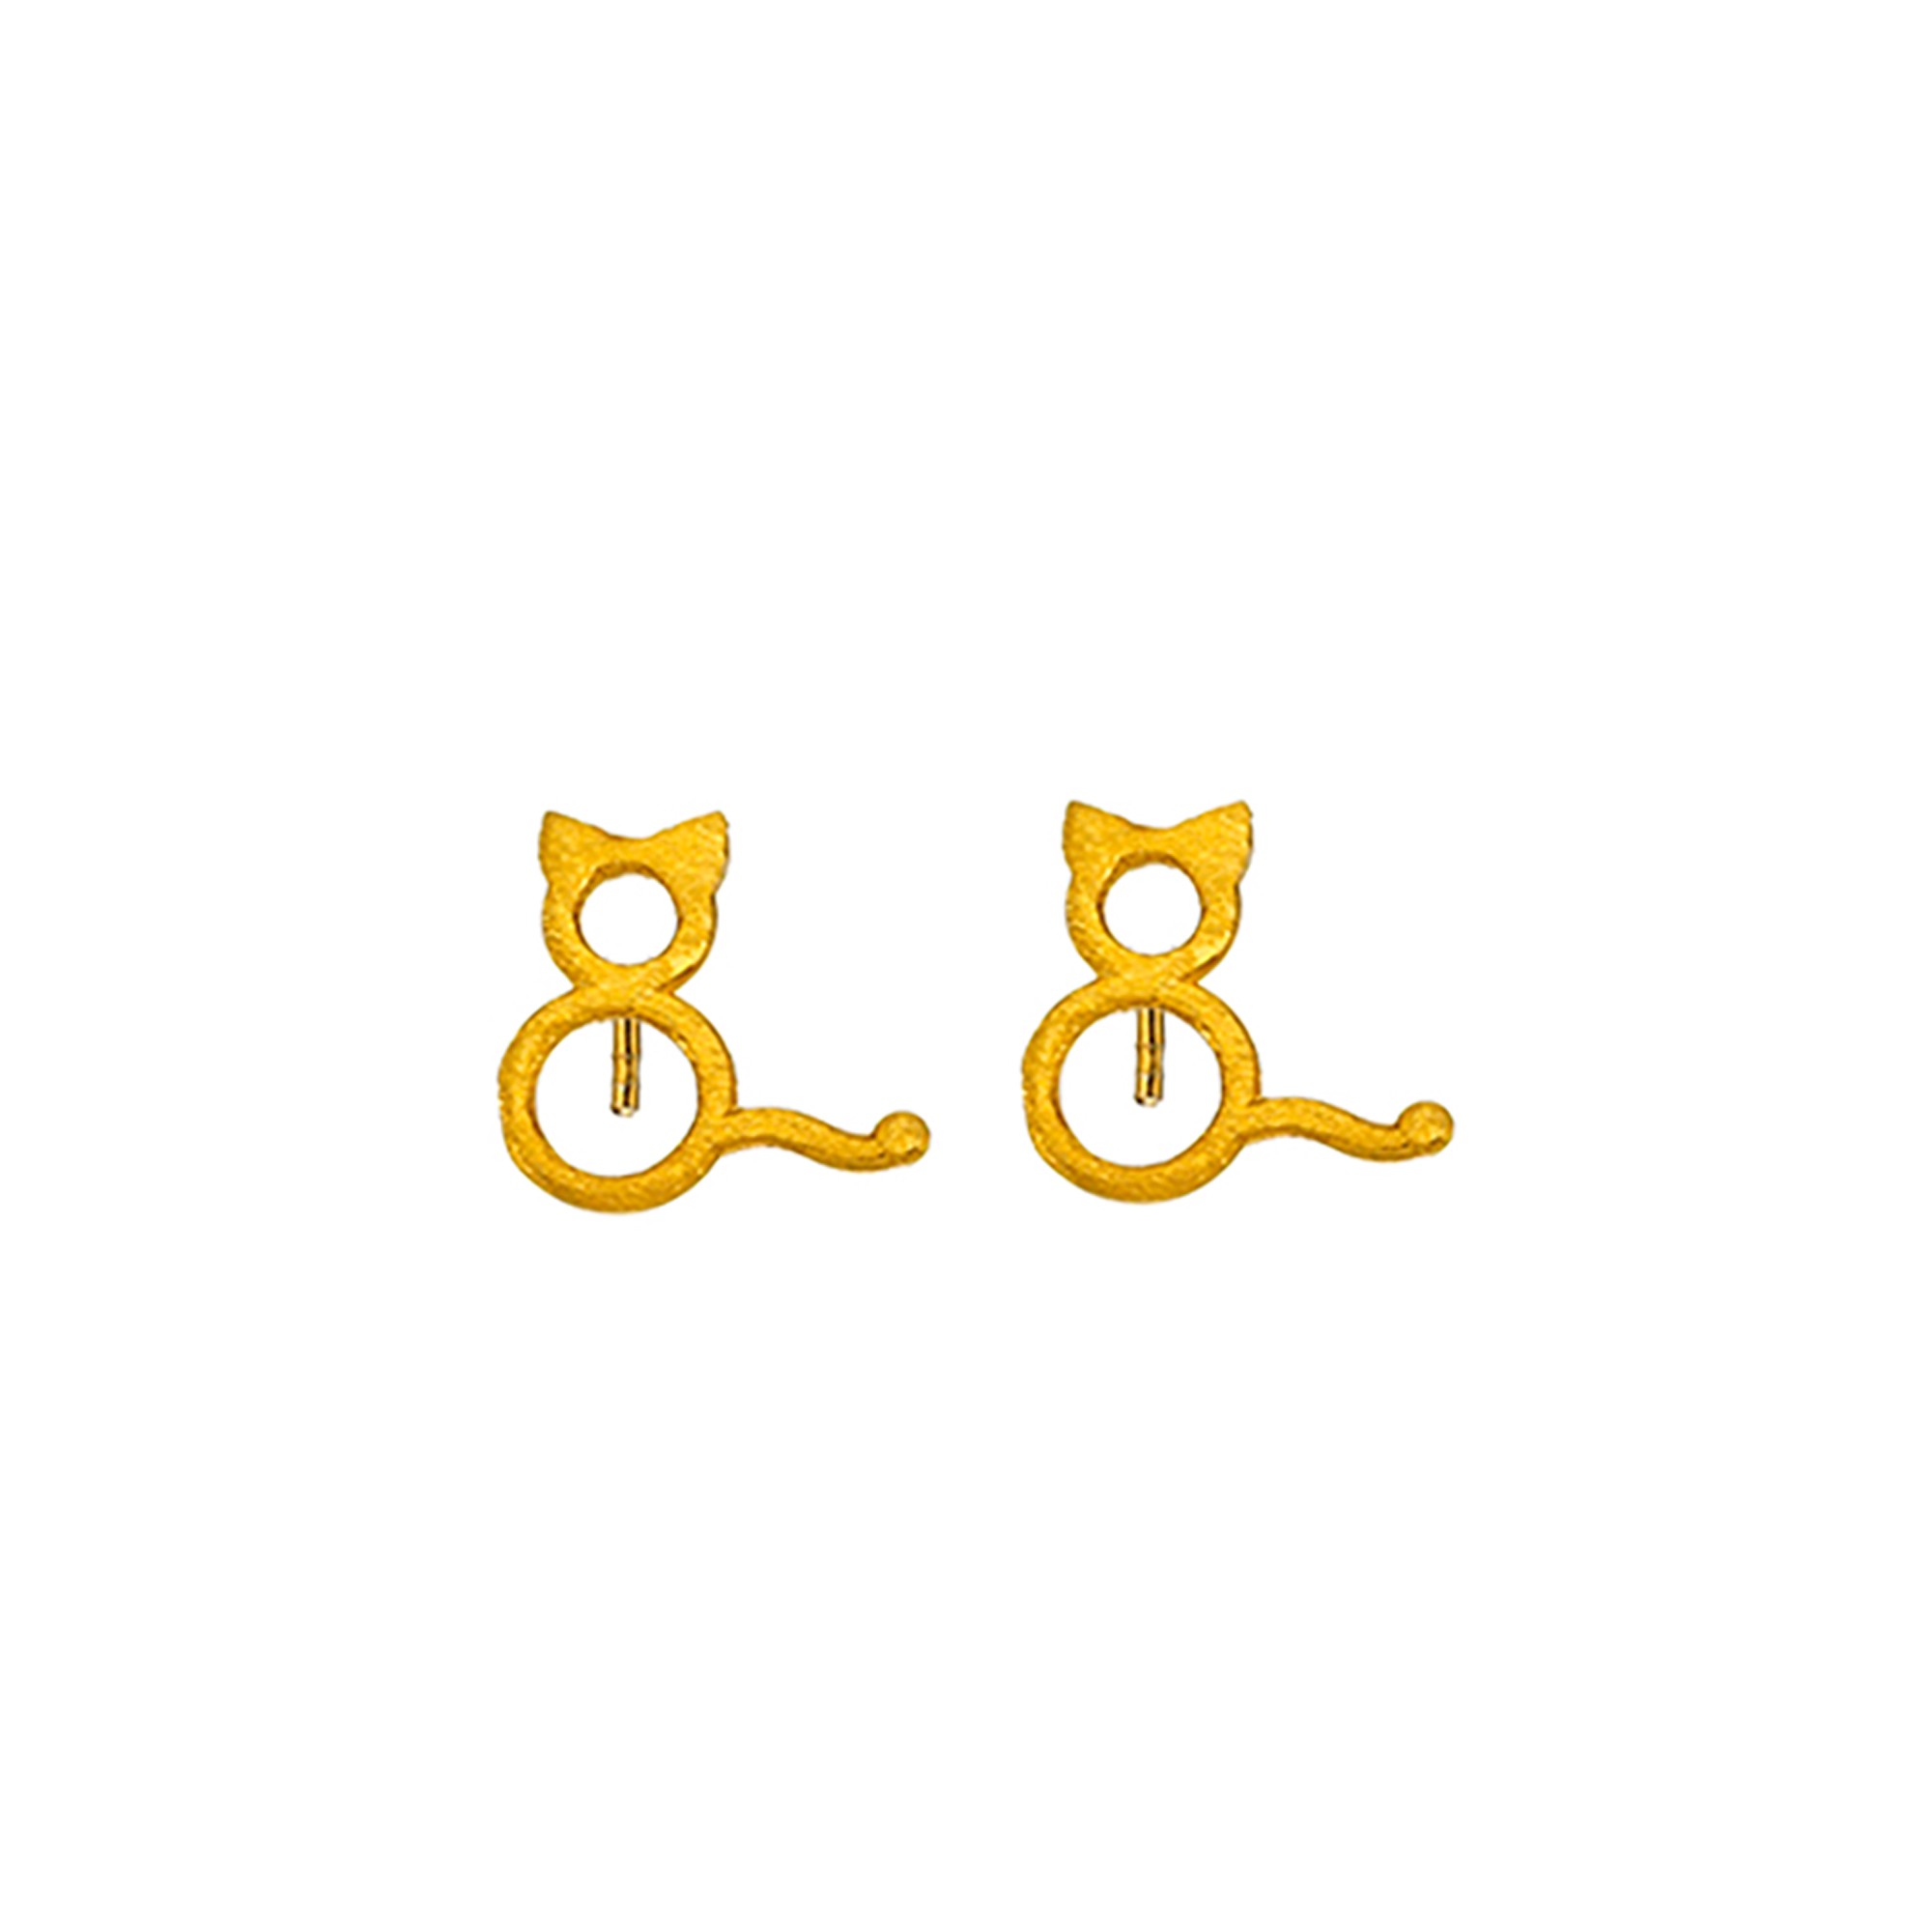 Love GOLD 9ct Gold Cat Stud Earrings  verycouk